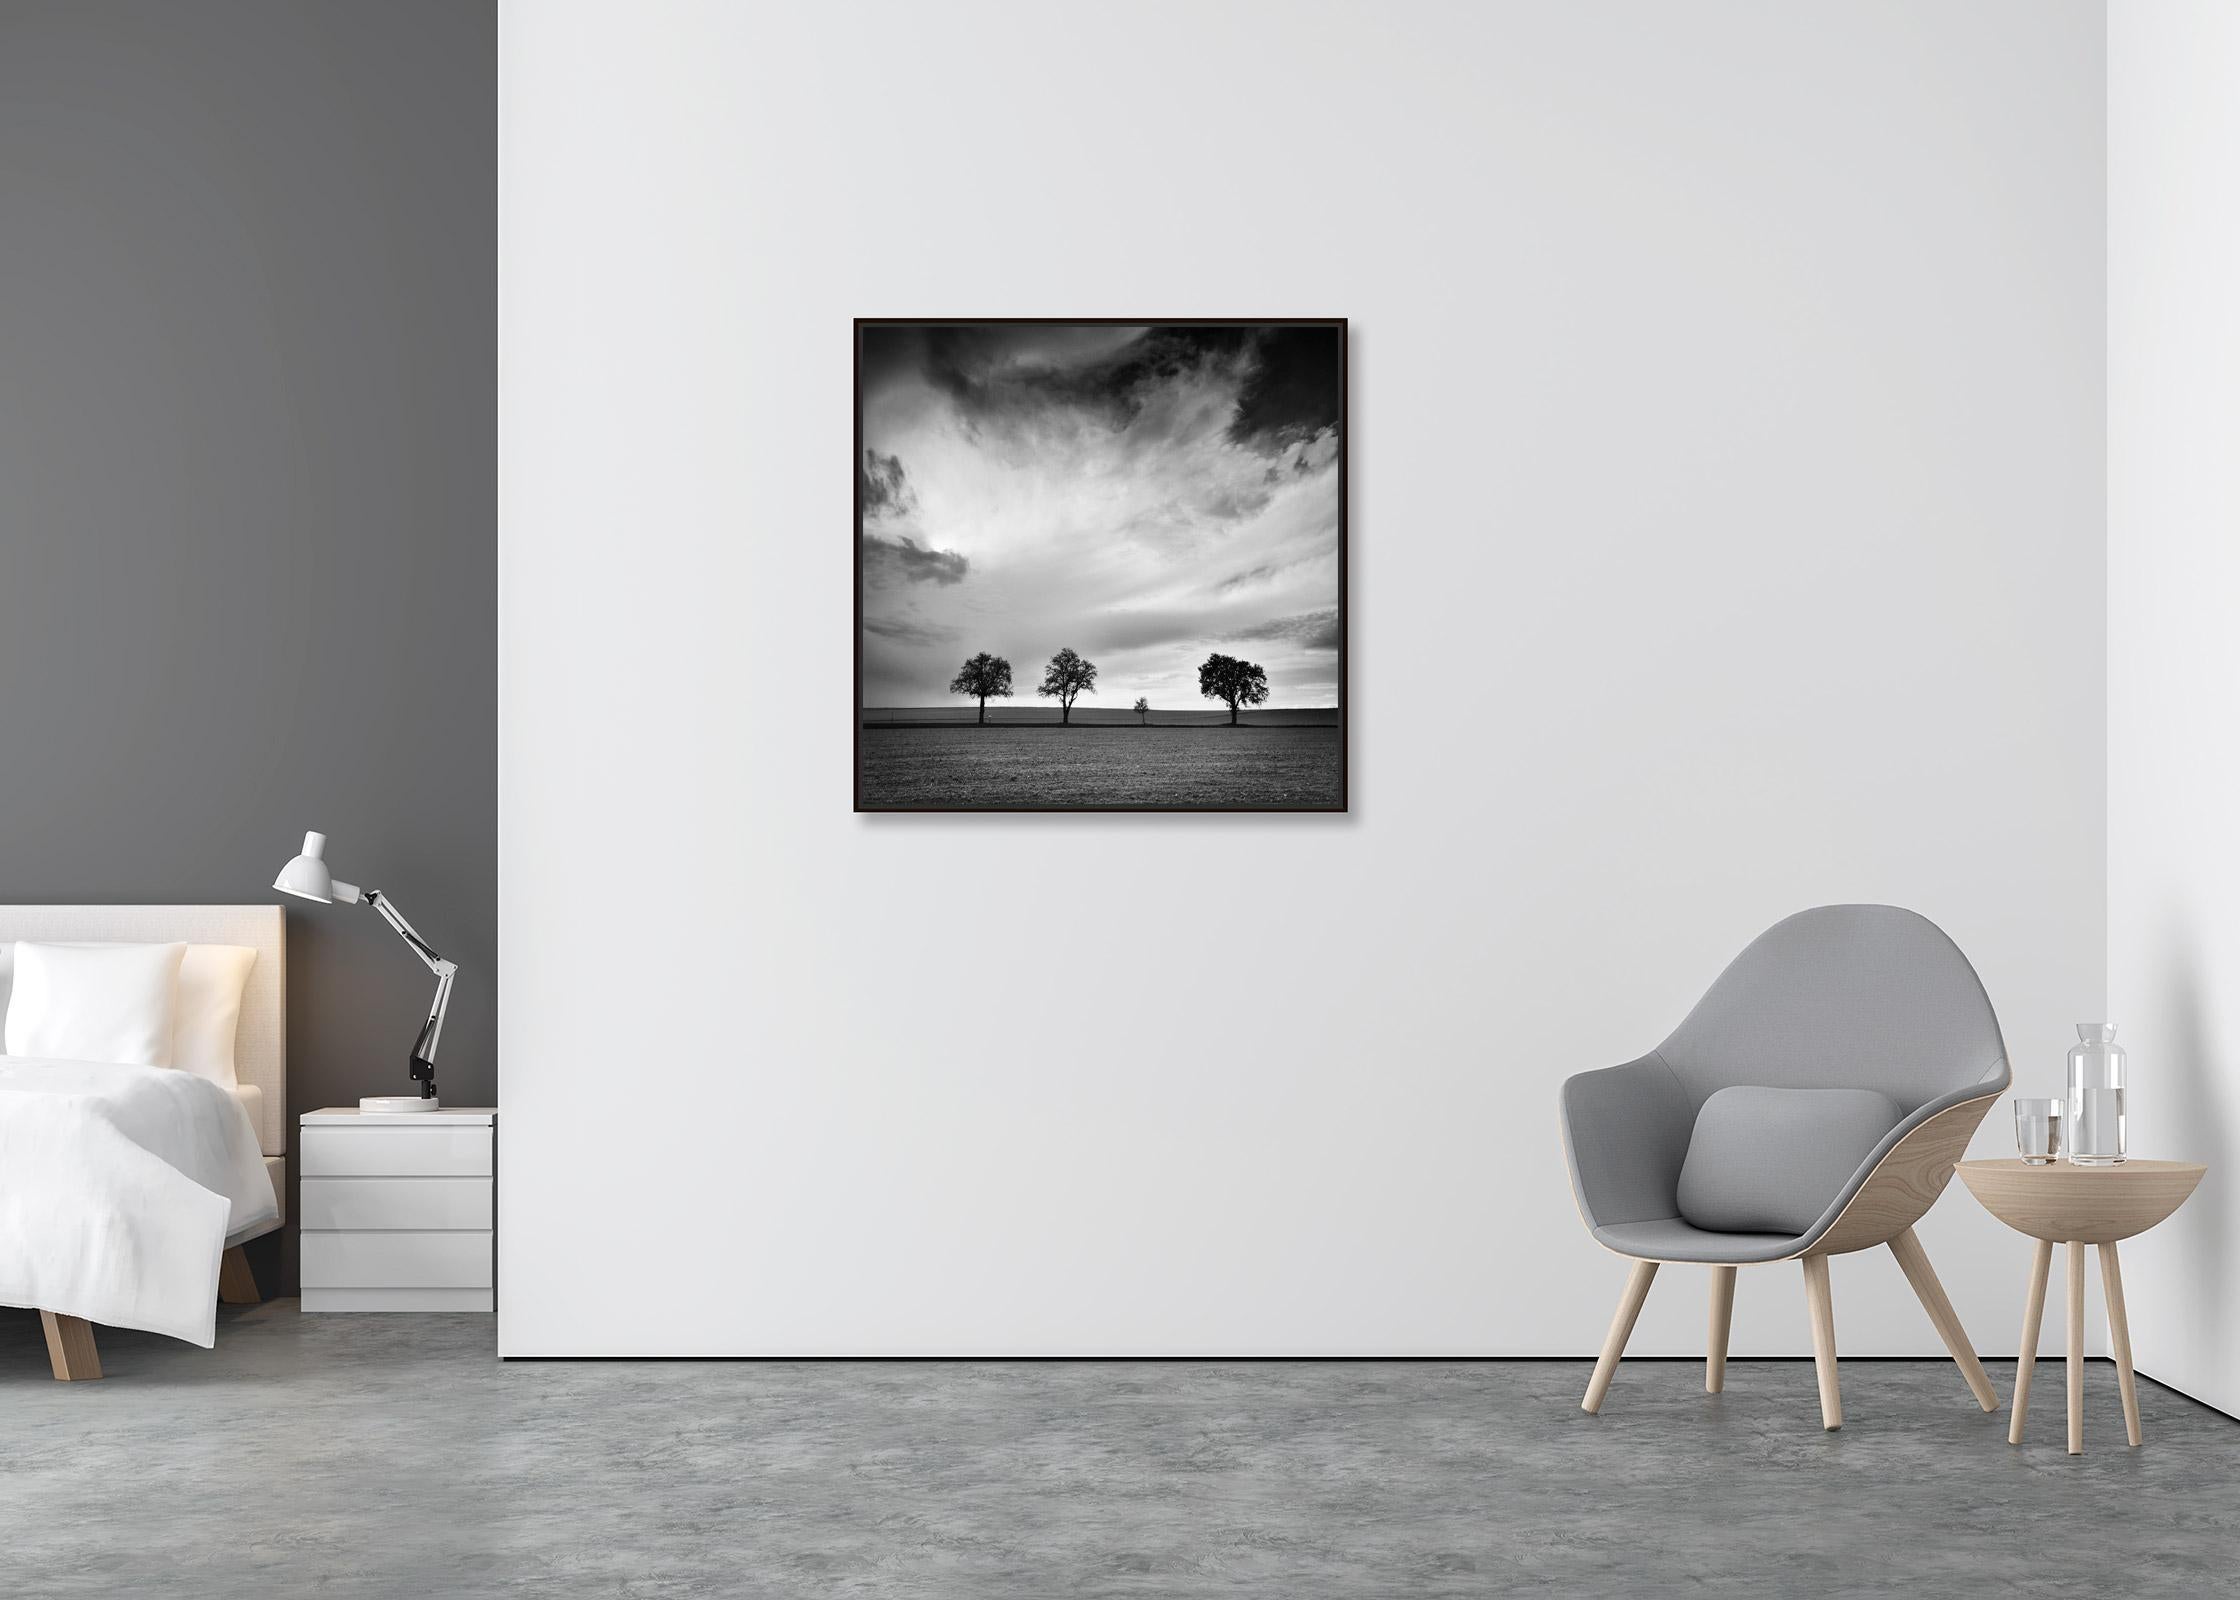 Three and a half Tree, very cloudy, storm, black and white landscape photography - Contemporary Photograph by Gerald Berghammer